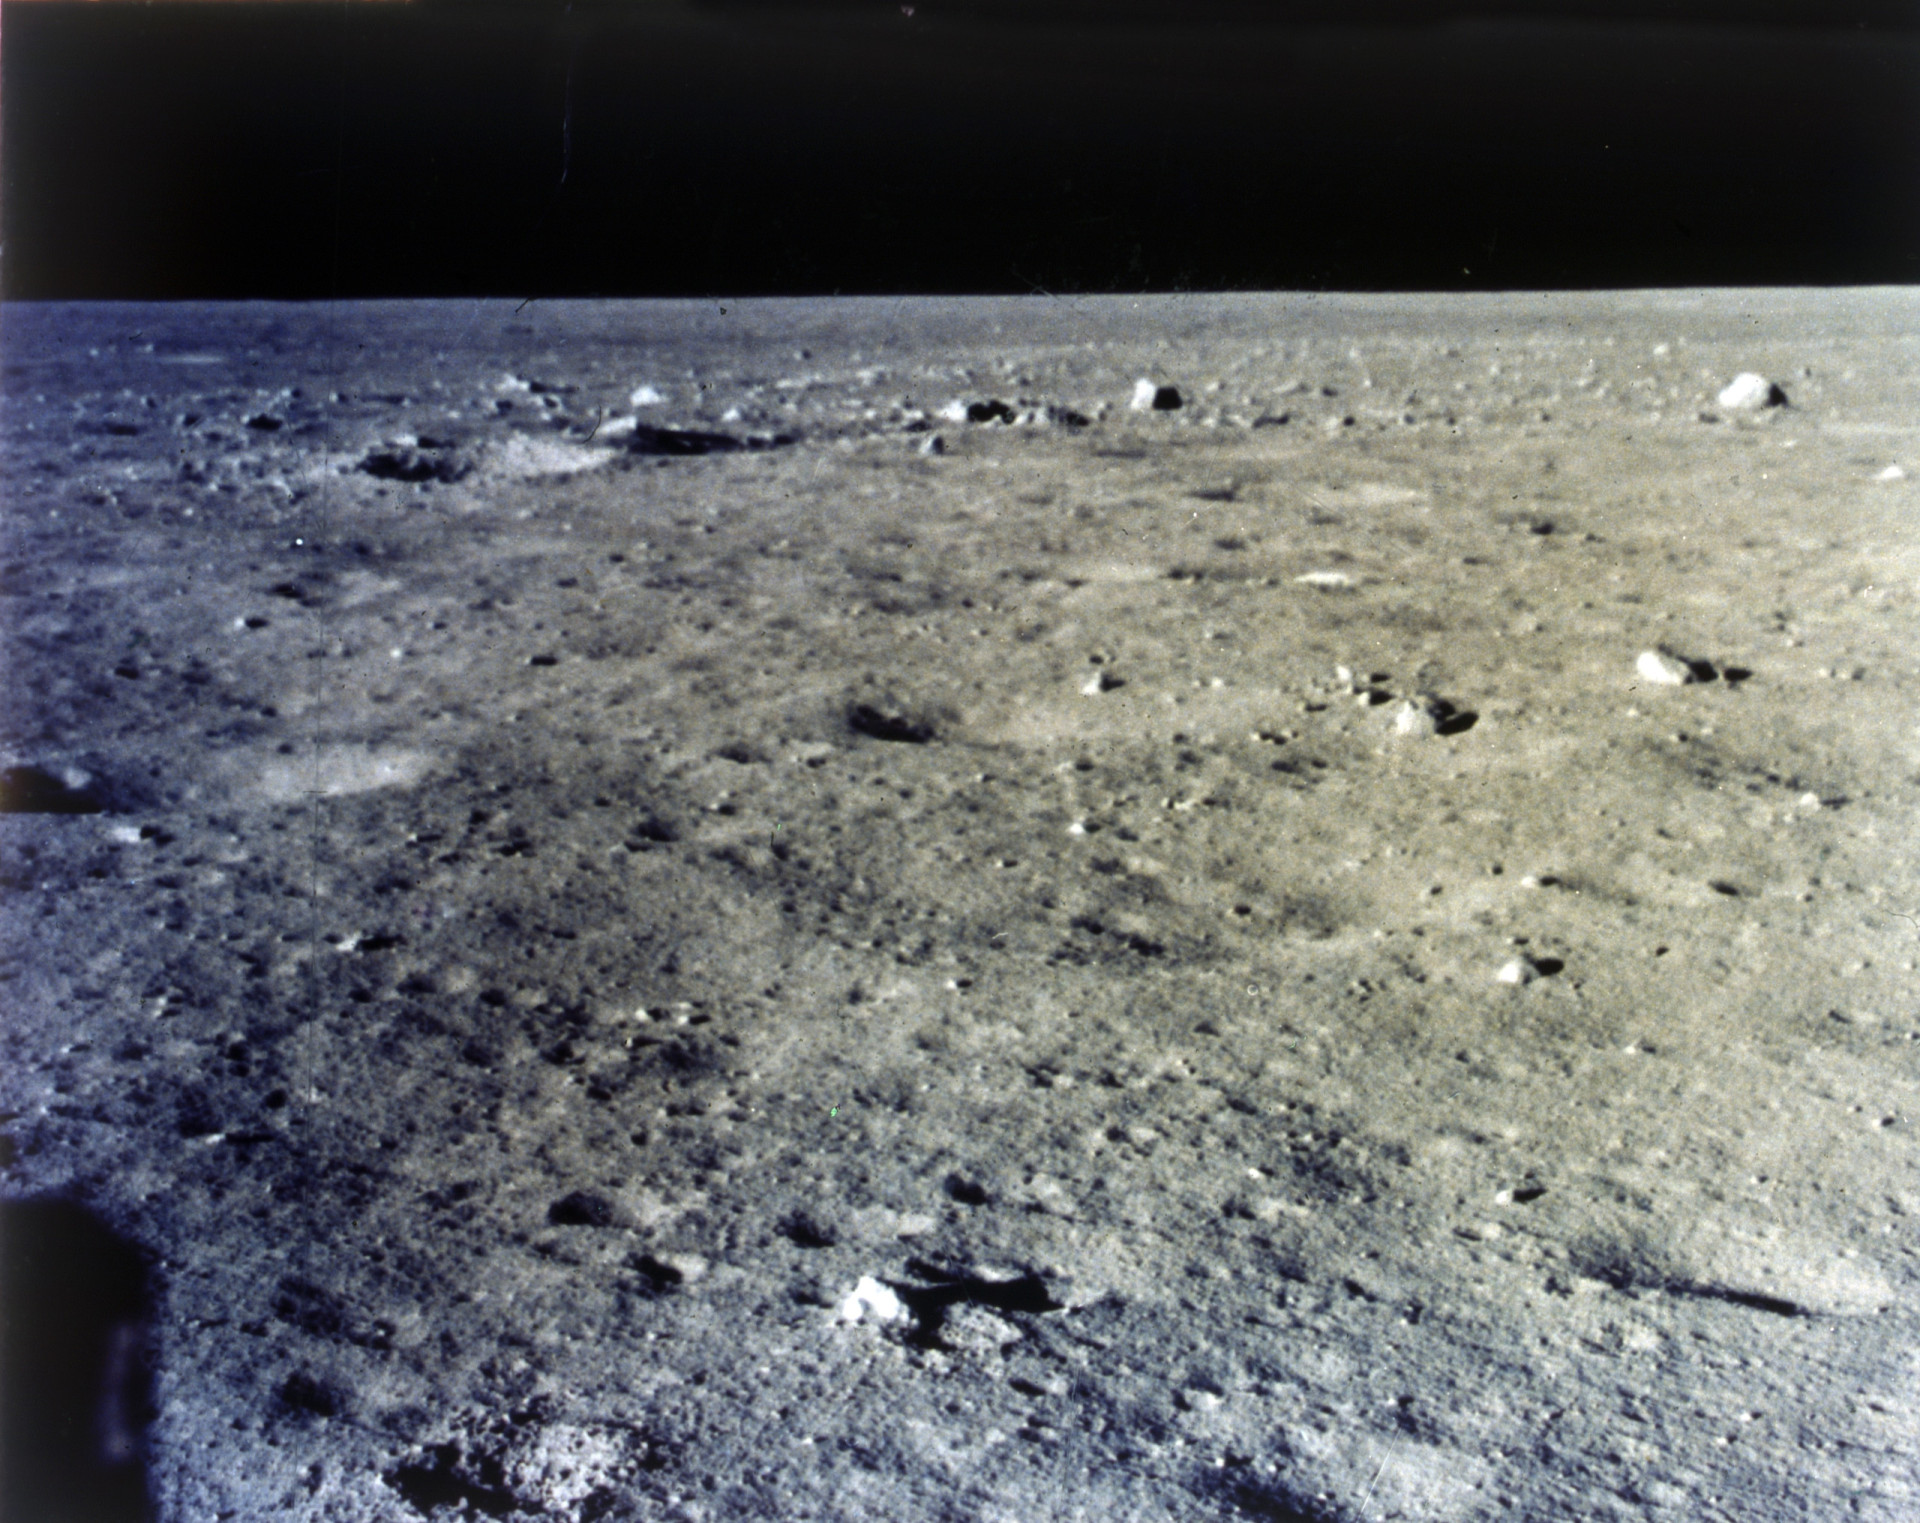 <p>The plan included the placement of three instruments on the Moon’s surface to take measurements. The instruments would collect data before, during, and after the explosion to better help understand the composition of the Moon.</p><p>You may also like:<a href="https://www.starsinsider.com/n/343987?utm_source=msn.com&utm_medium=display&utm_campaign=referral_description&utm_content=713901en-ph"> Bandmates who shared intimate encounters</a></p>